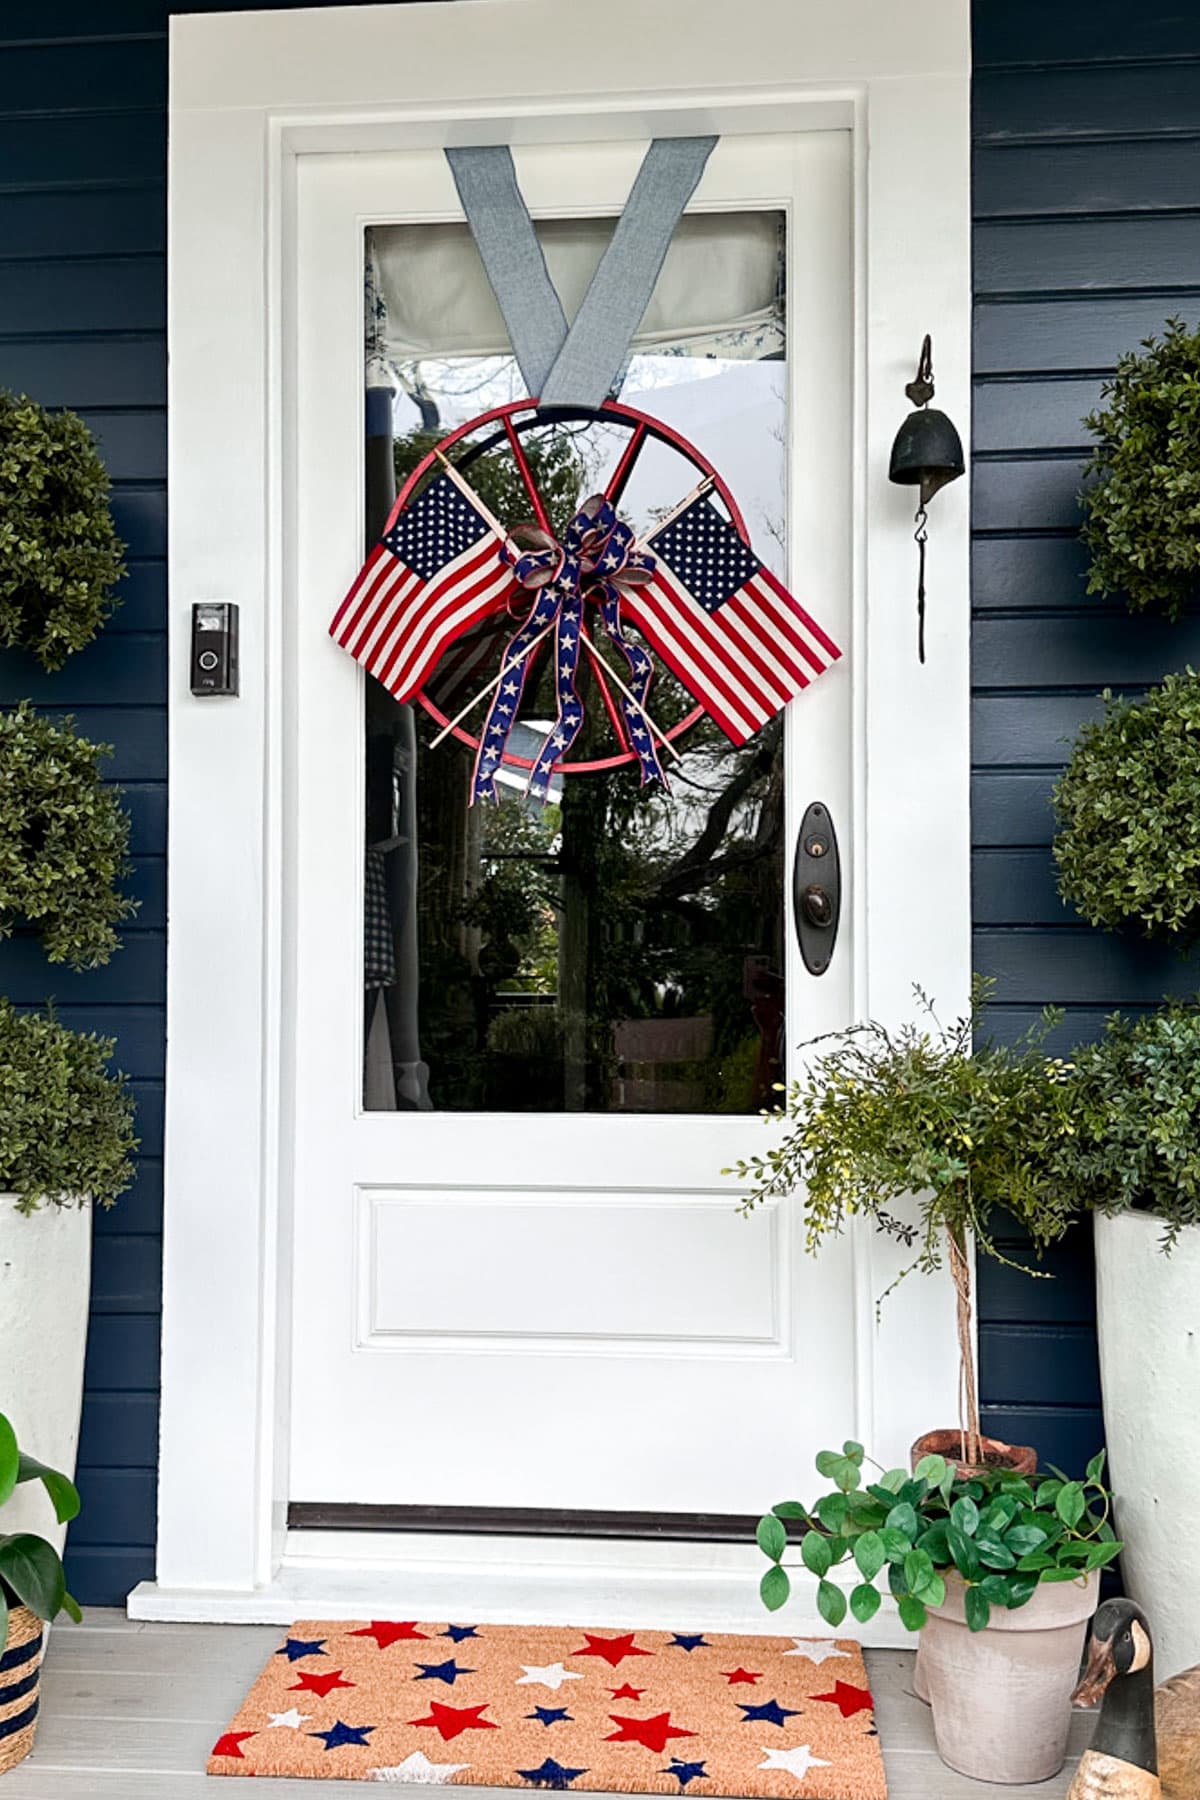 The front door was decorated for the Fourth of July with a flag wreath and a doormat with stars. 